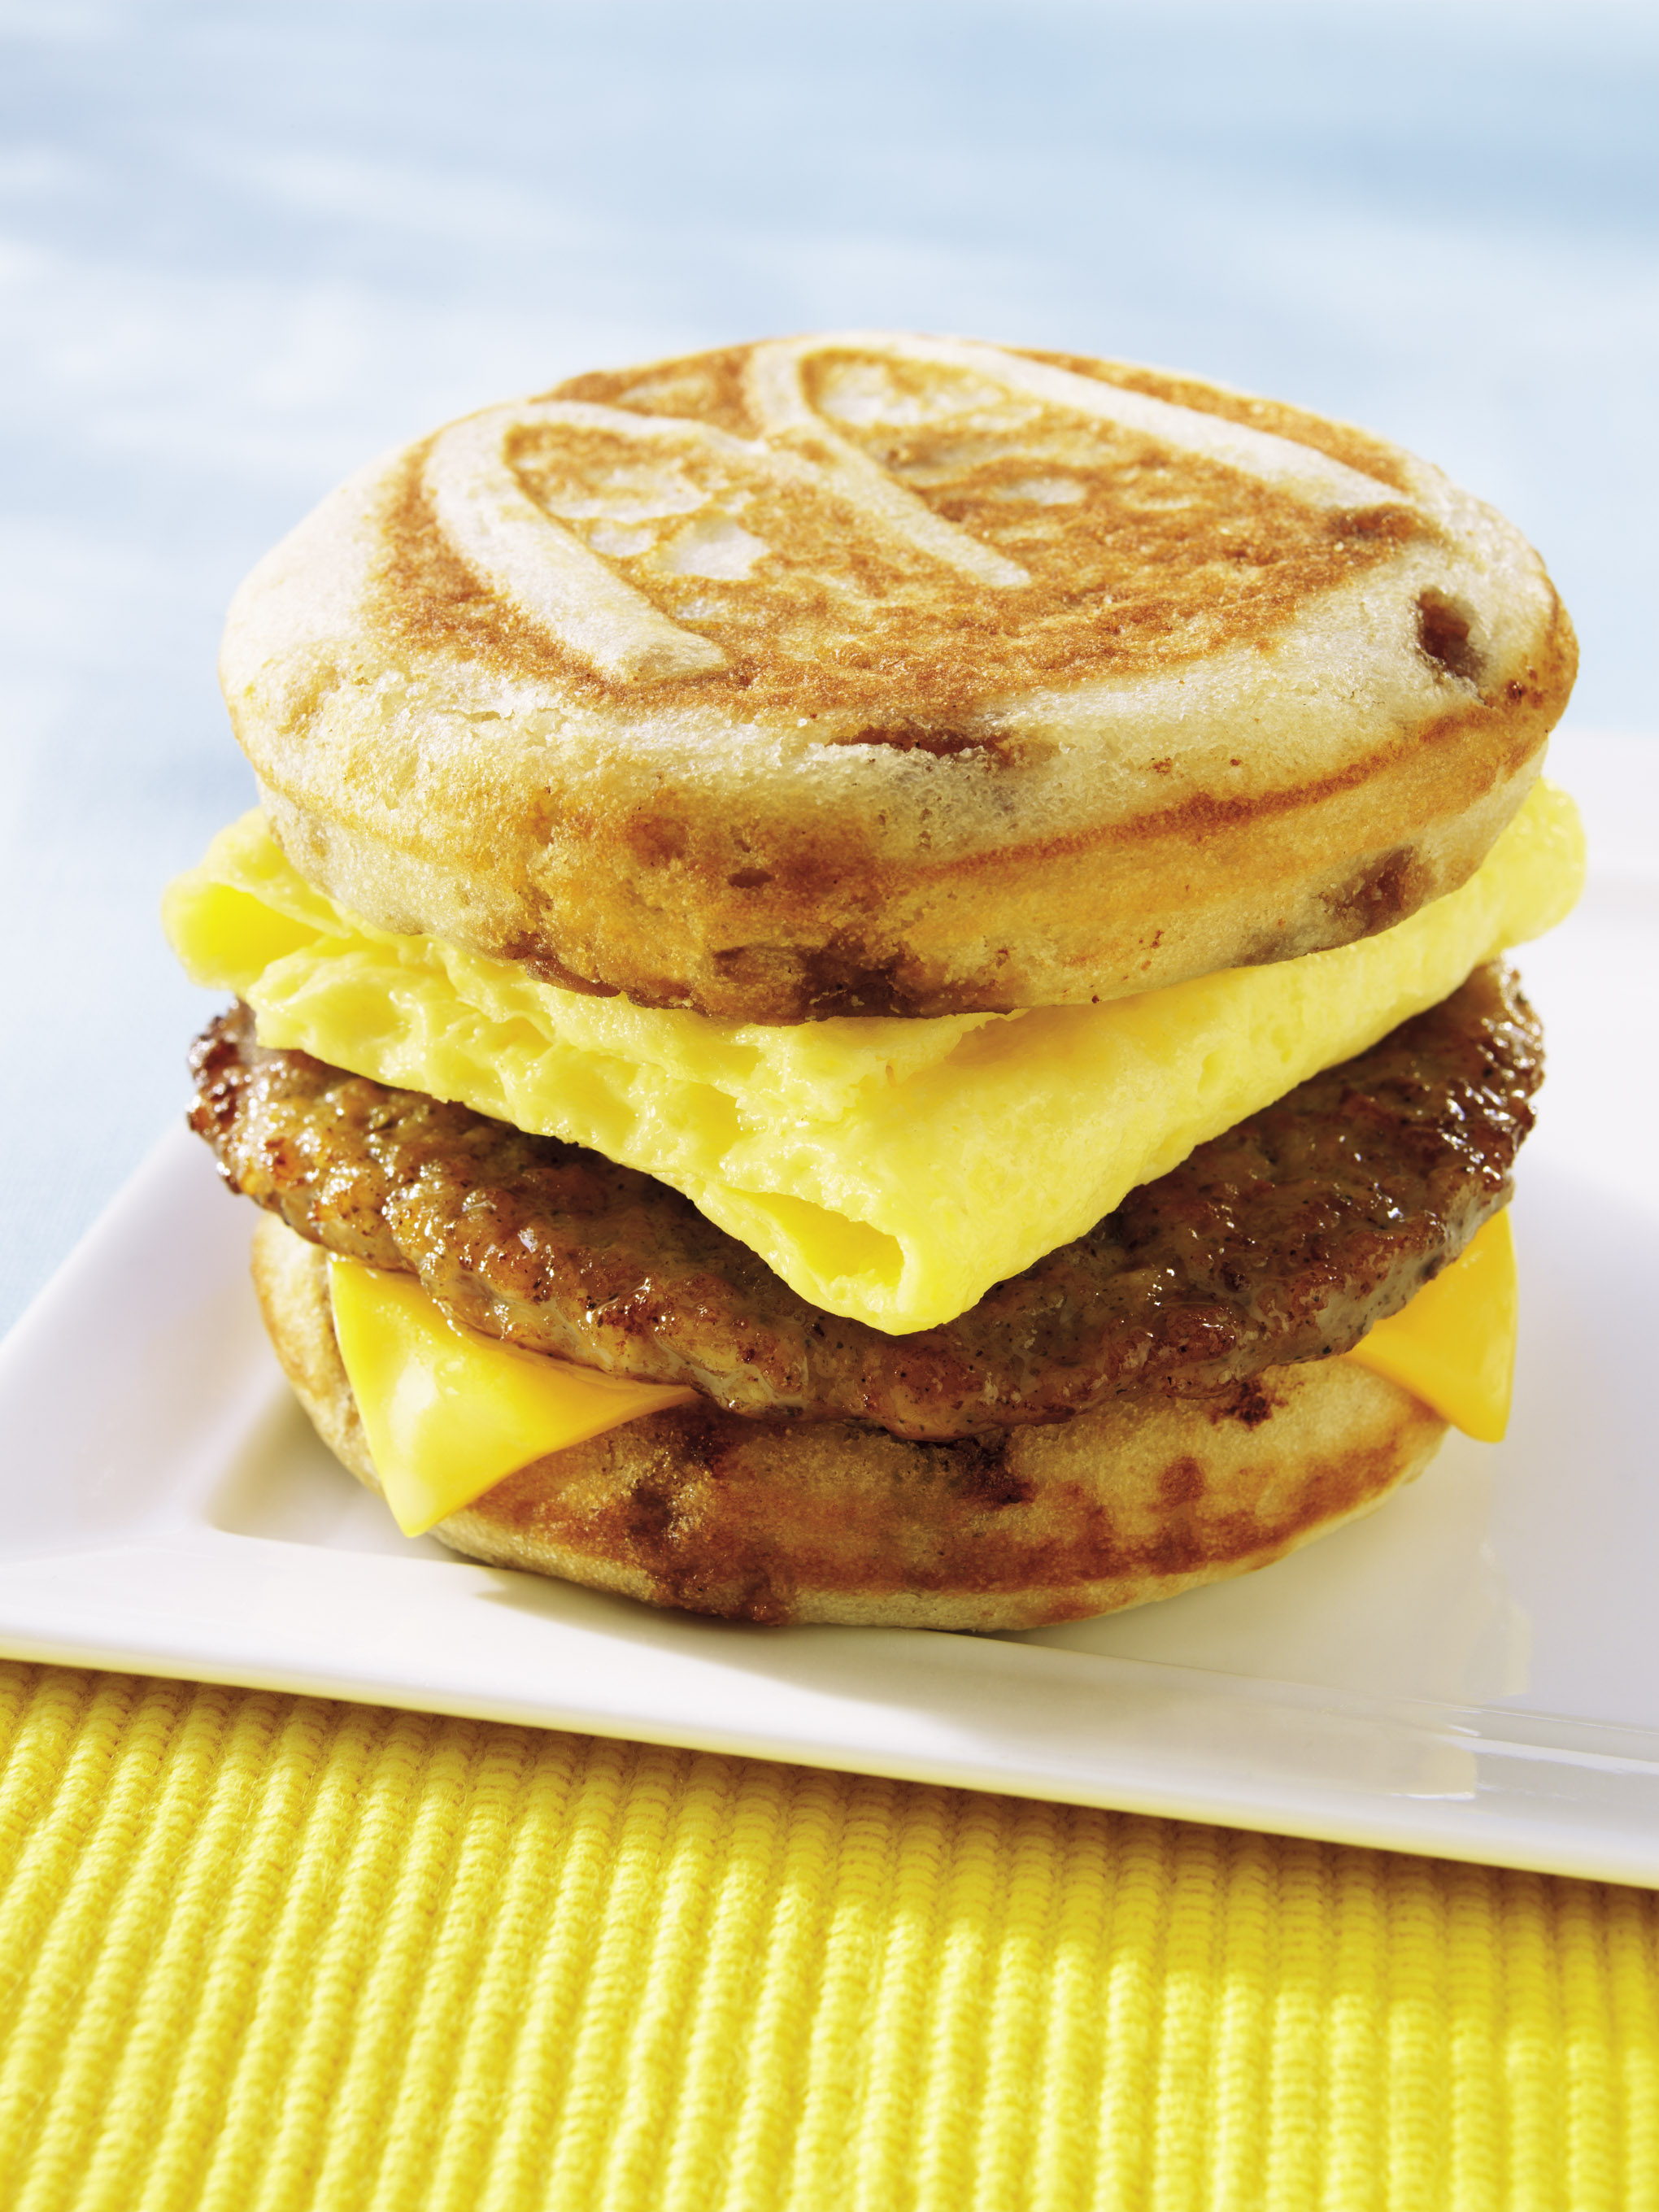 this McGriddle is better than the original